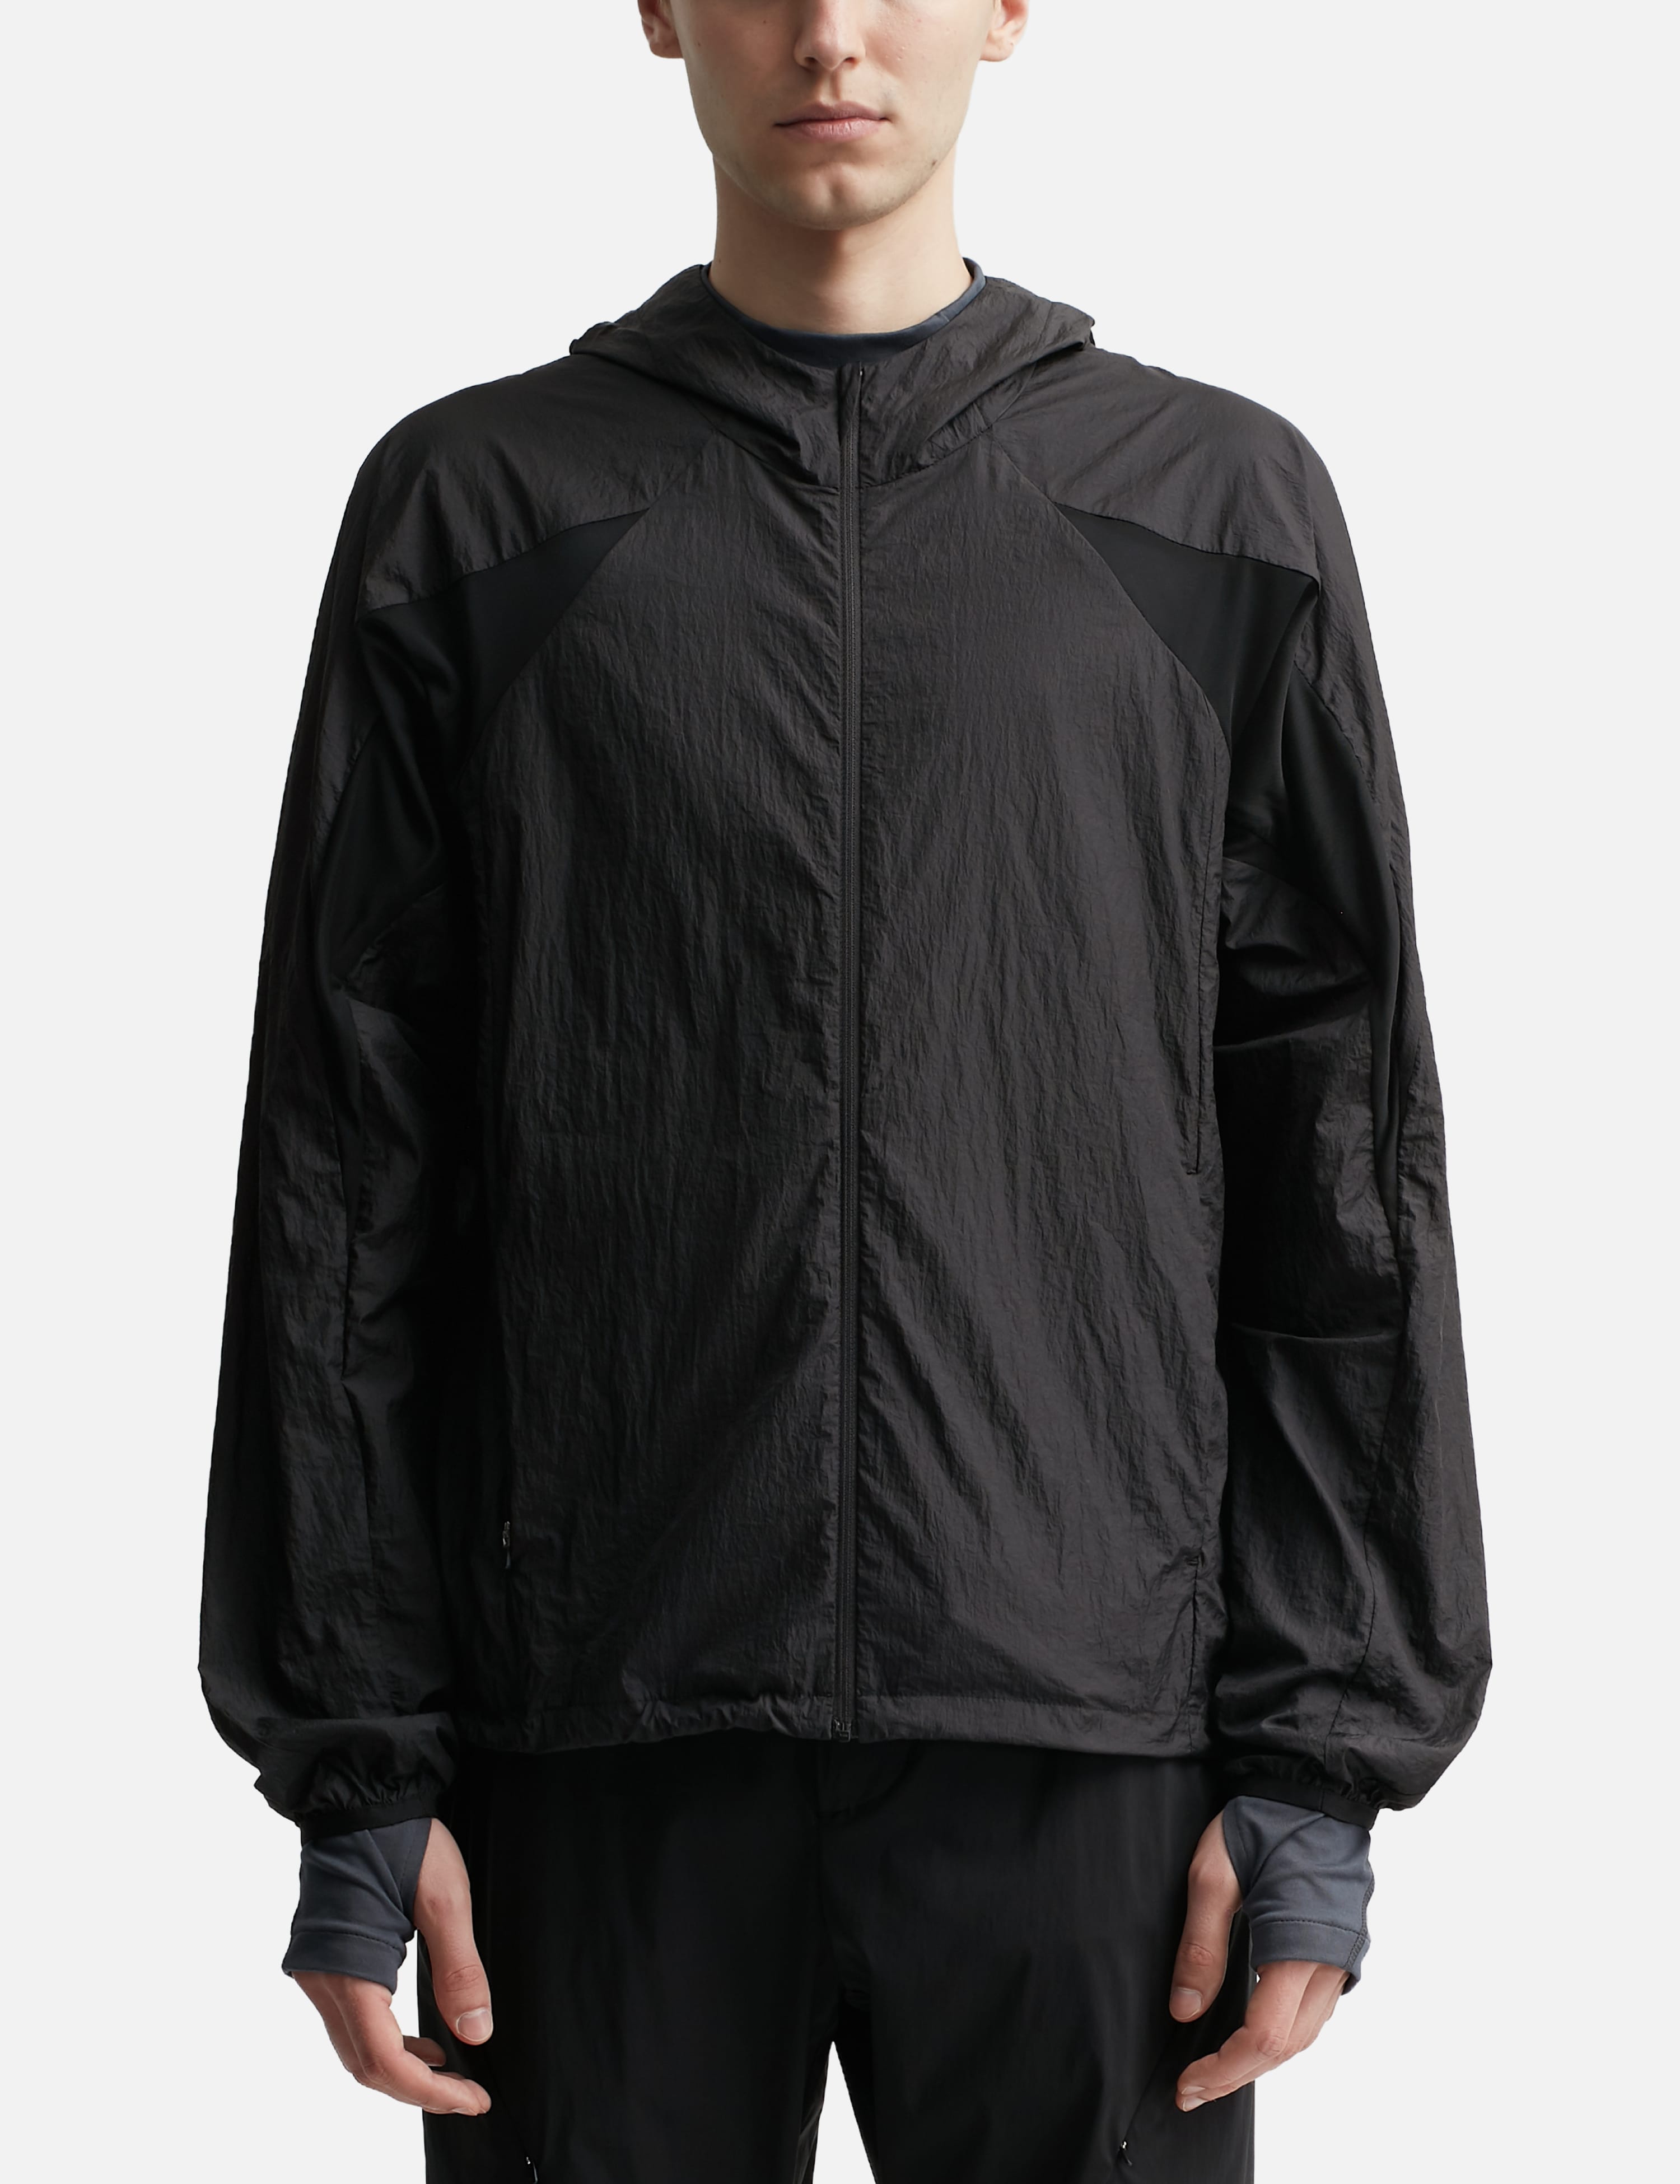 POST ARCHIVE FACTION (PAF) - 5.0+ Technical Jacket Right | HBX